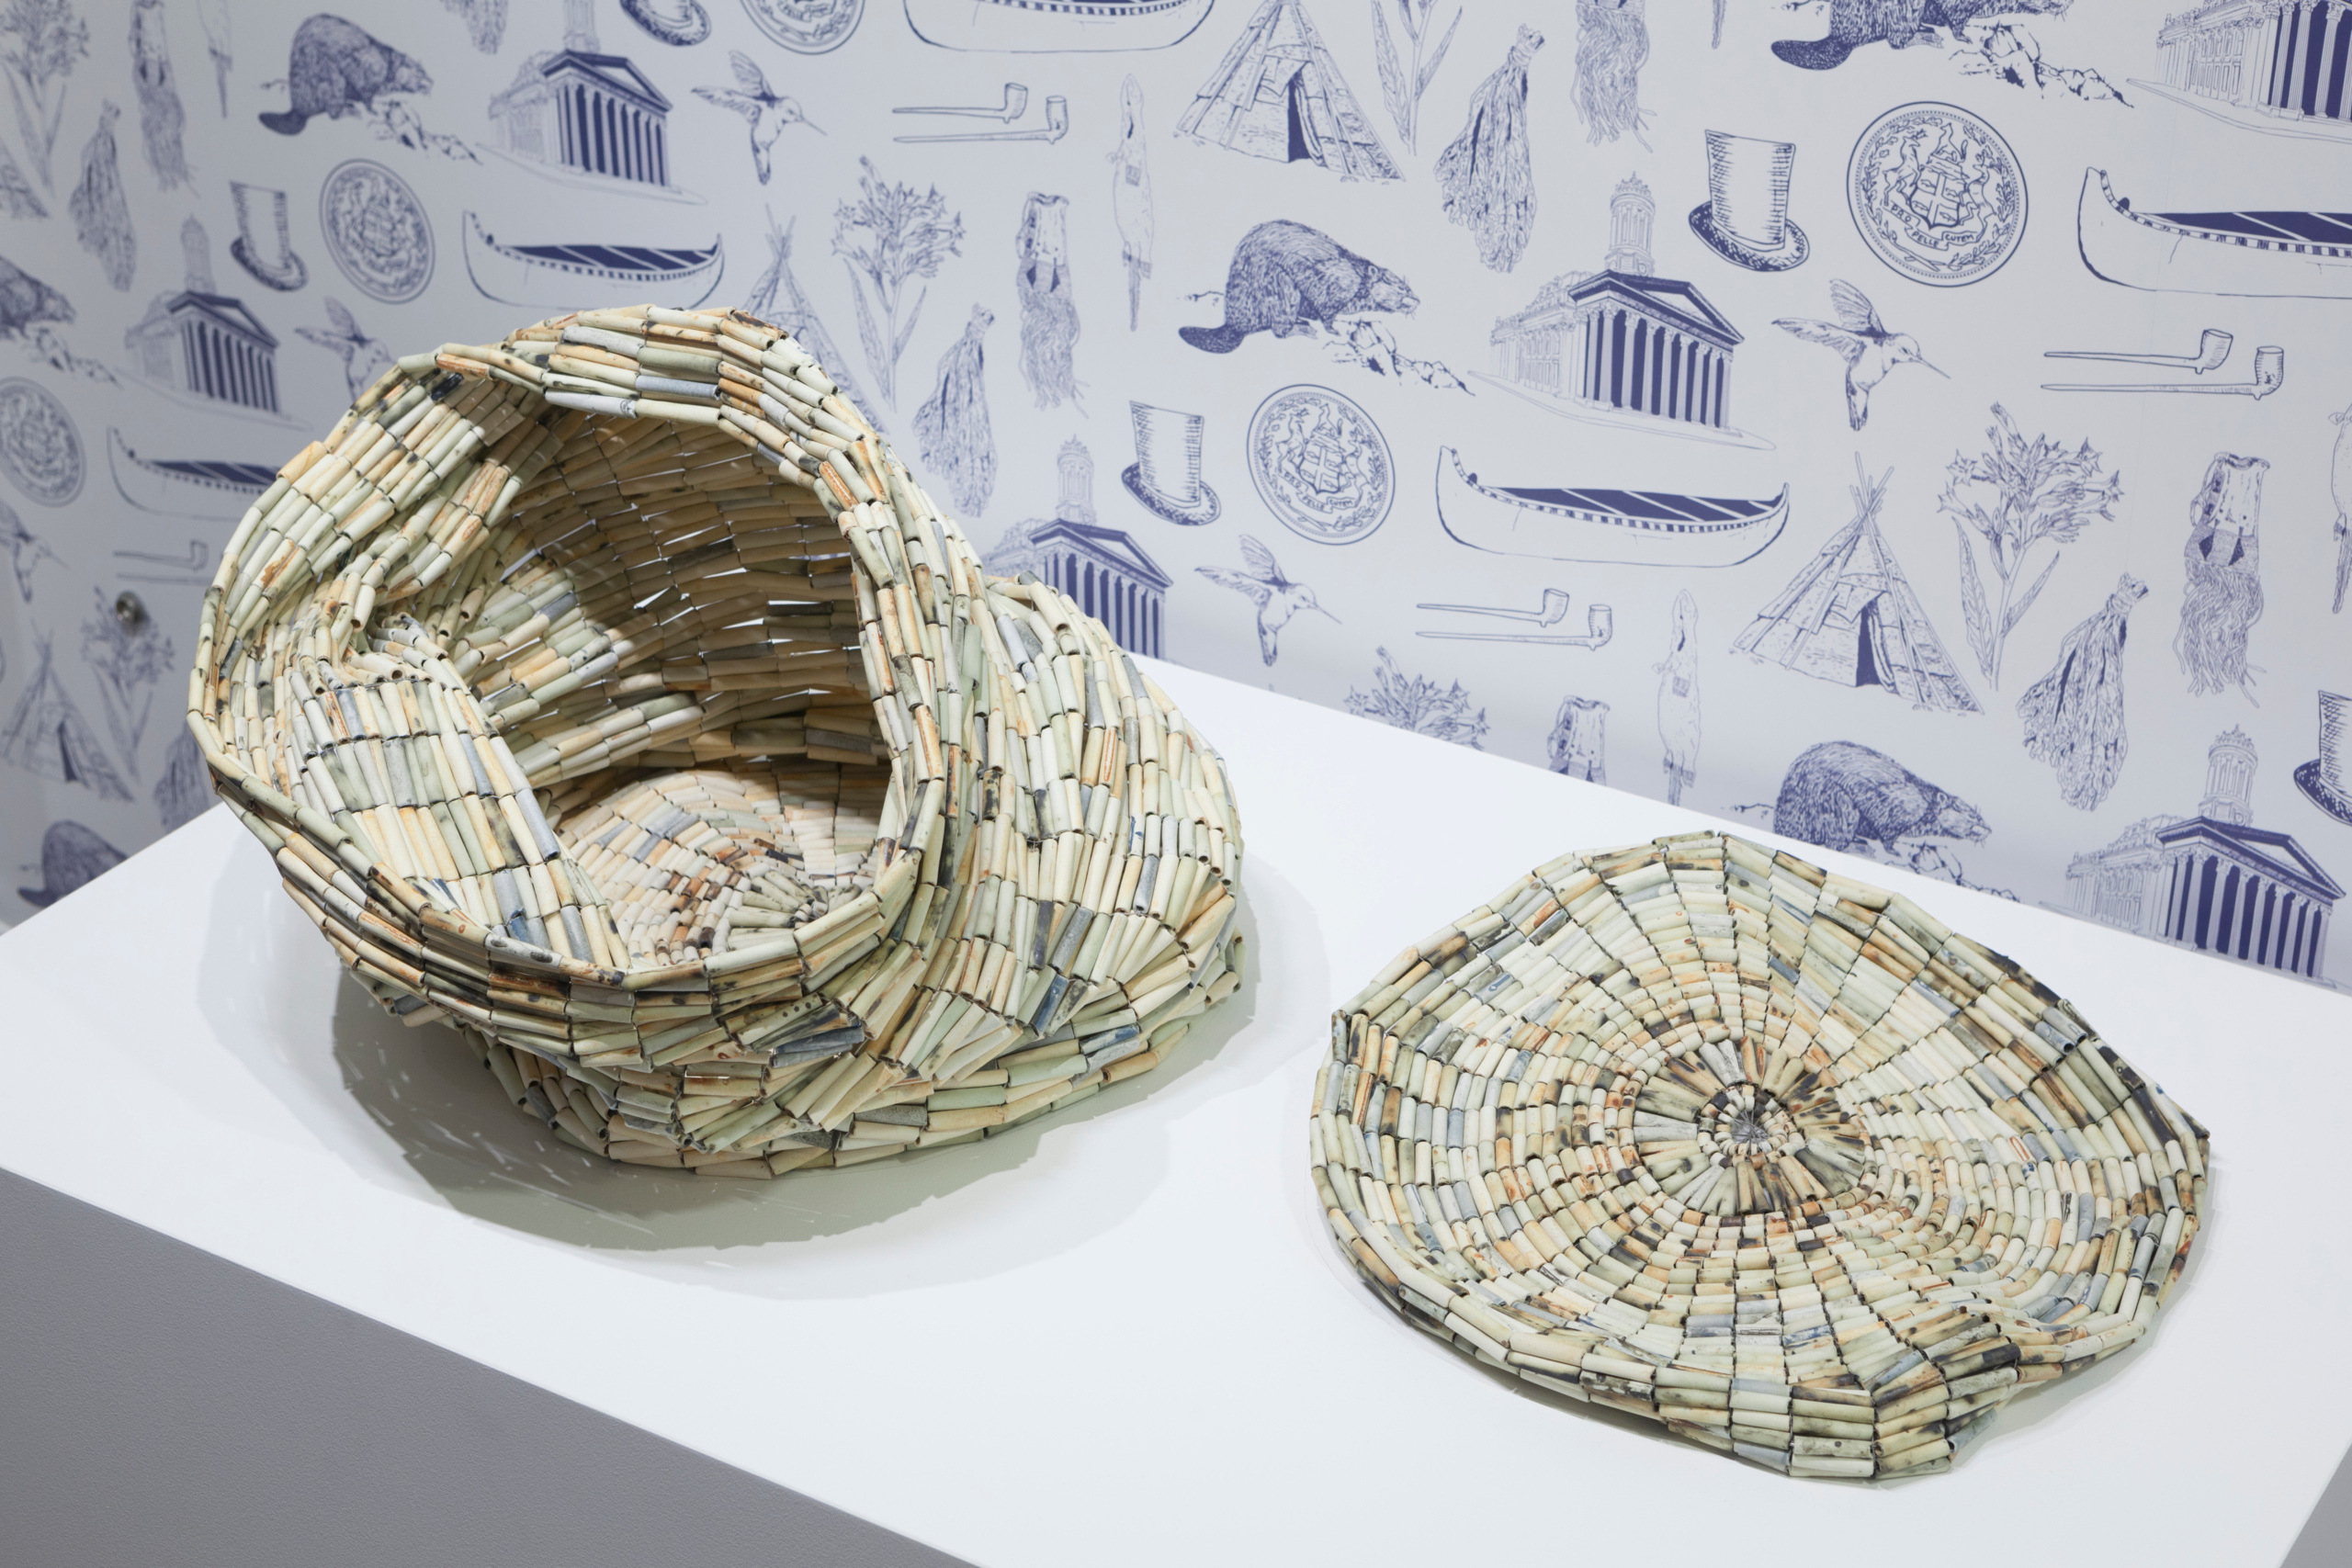     Installation view, Nadia Myre, Untitled (Tobacco Barrel), 2018. Ceramic, various oxides, stainless steel thread, stainless steel.
Photo: Darren Rigo. Courtesy of the Textile Museum of Canada. 

